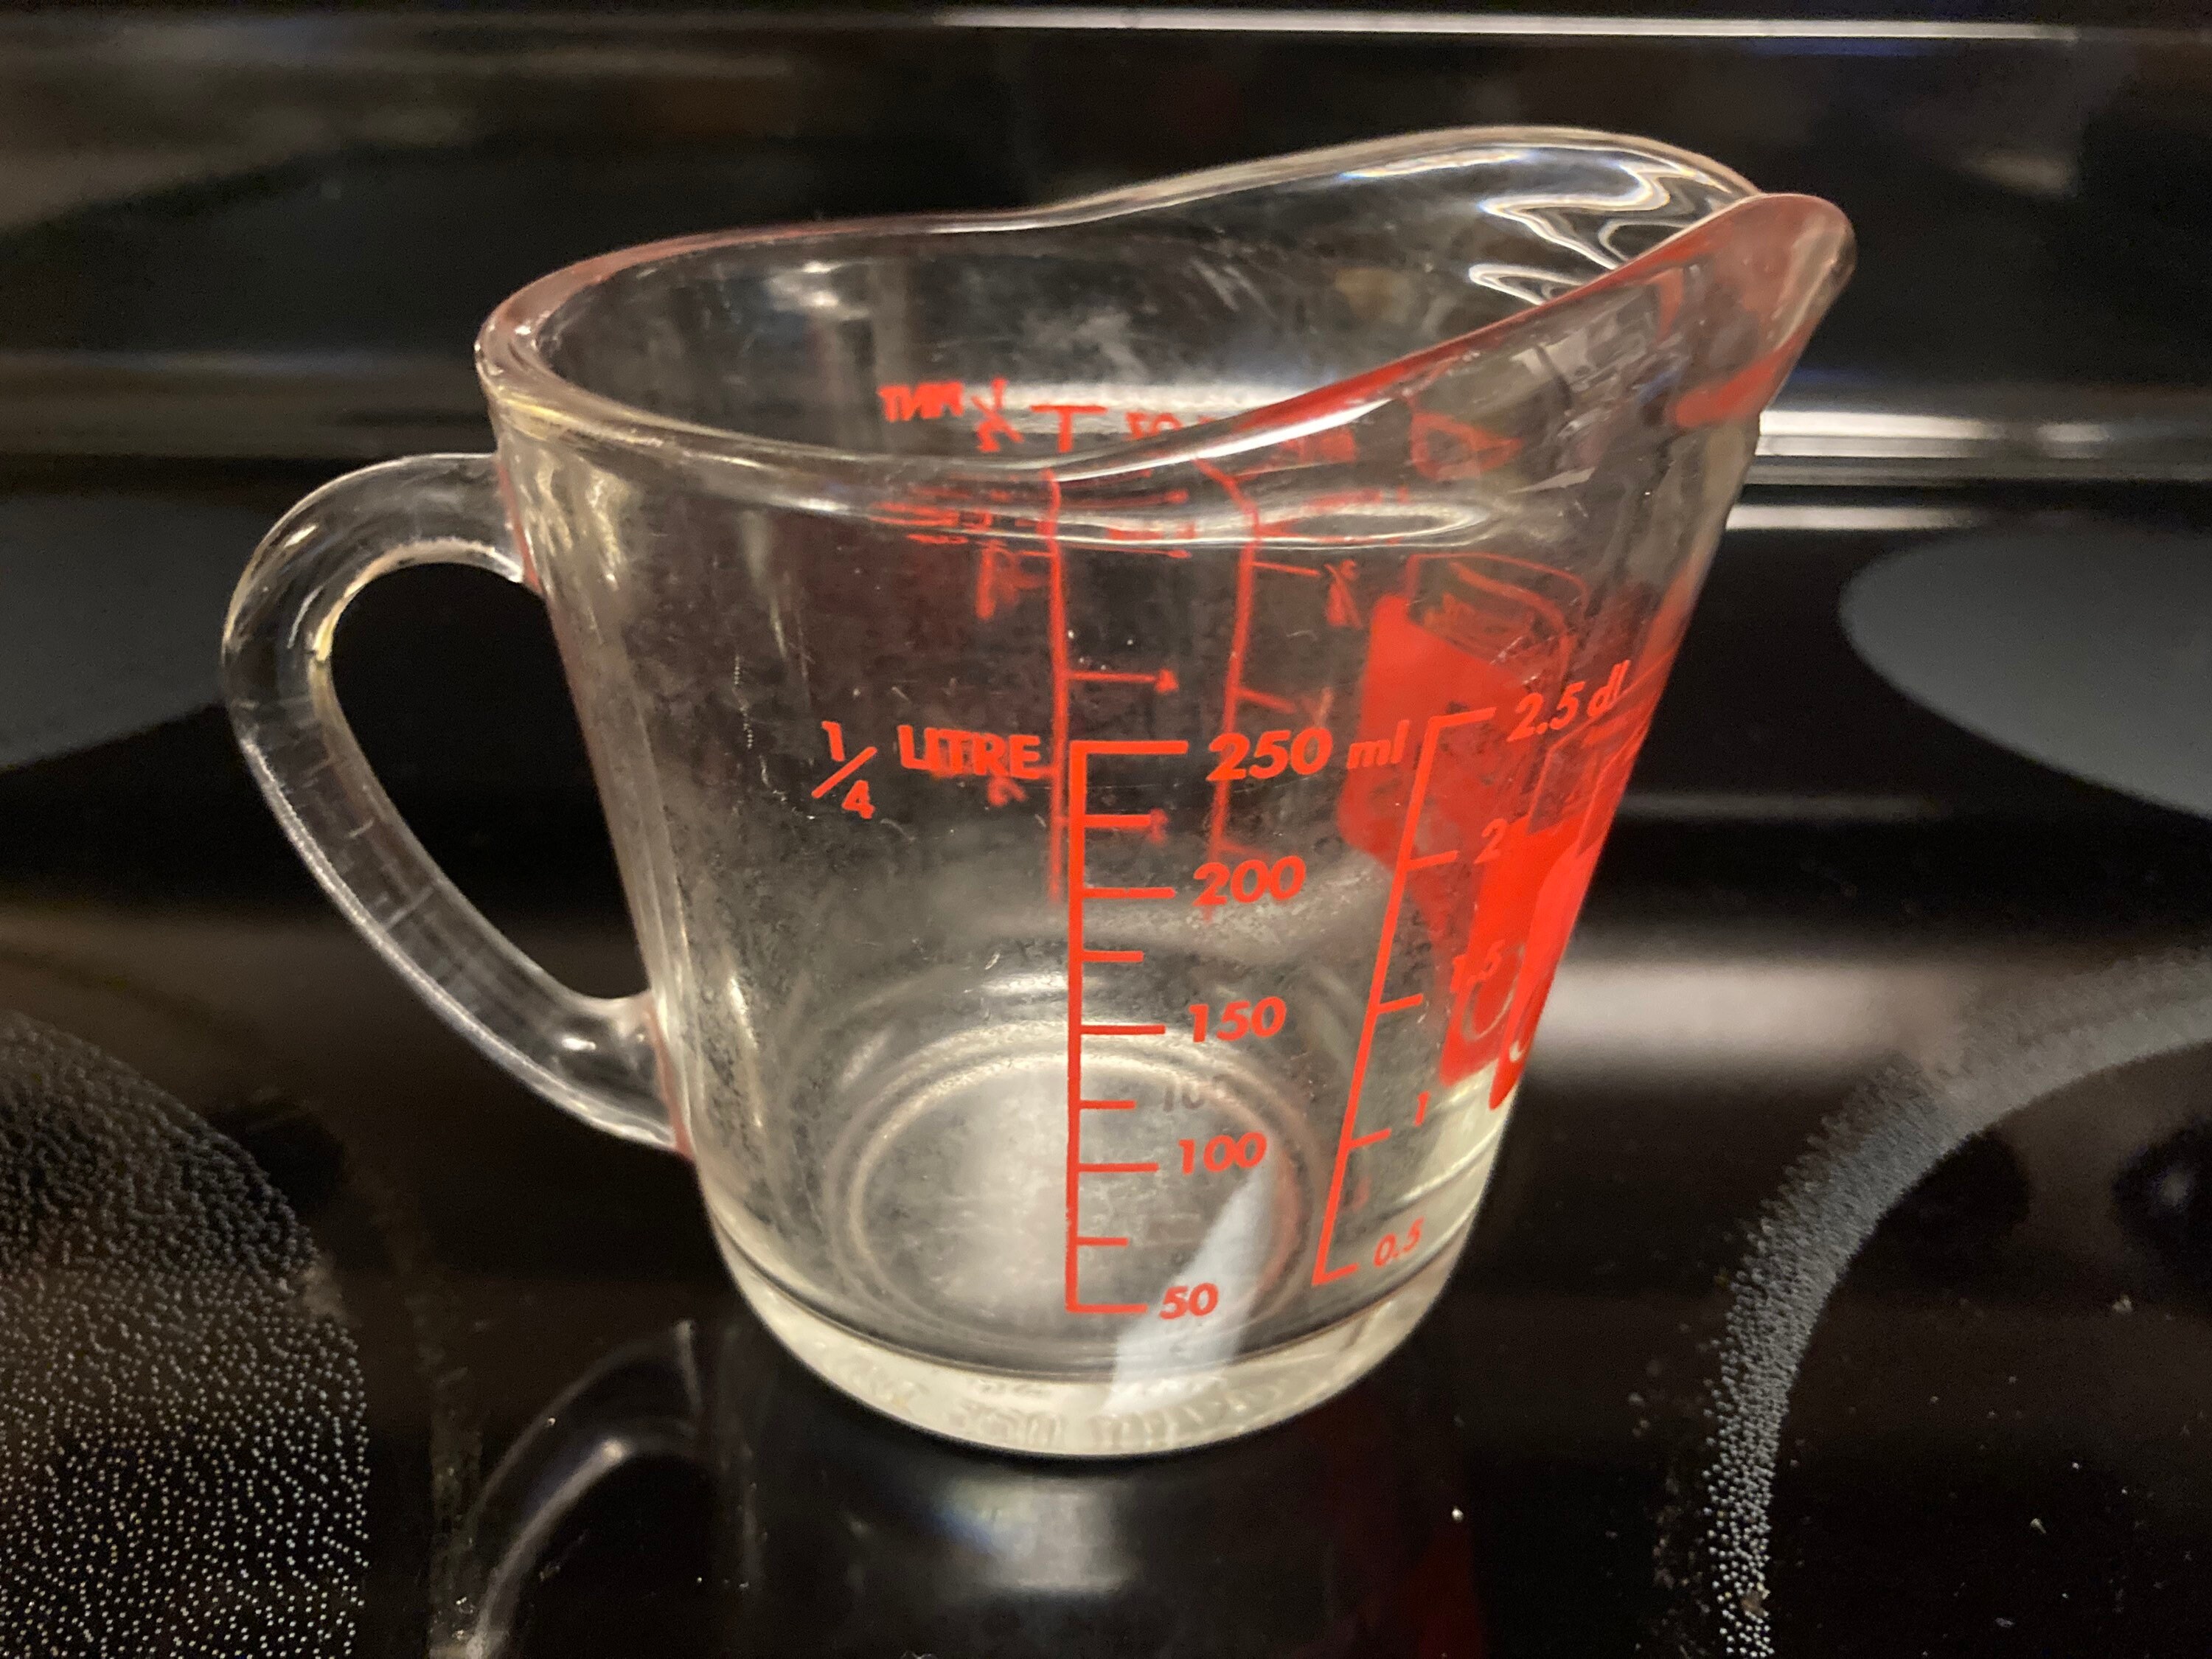 Anchor Hocking 496 One Cup Oven Originals Glass Measuring Cup, Vintage Glass  Anchor Hocking One Cup Measuring Cup 